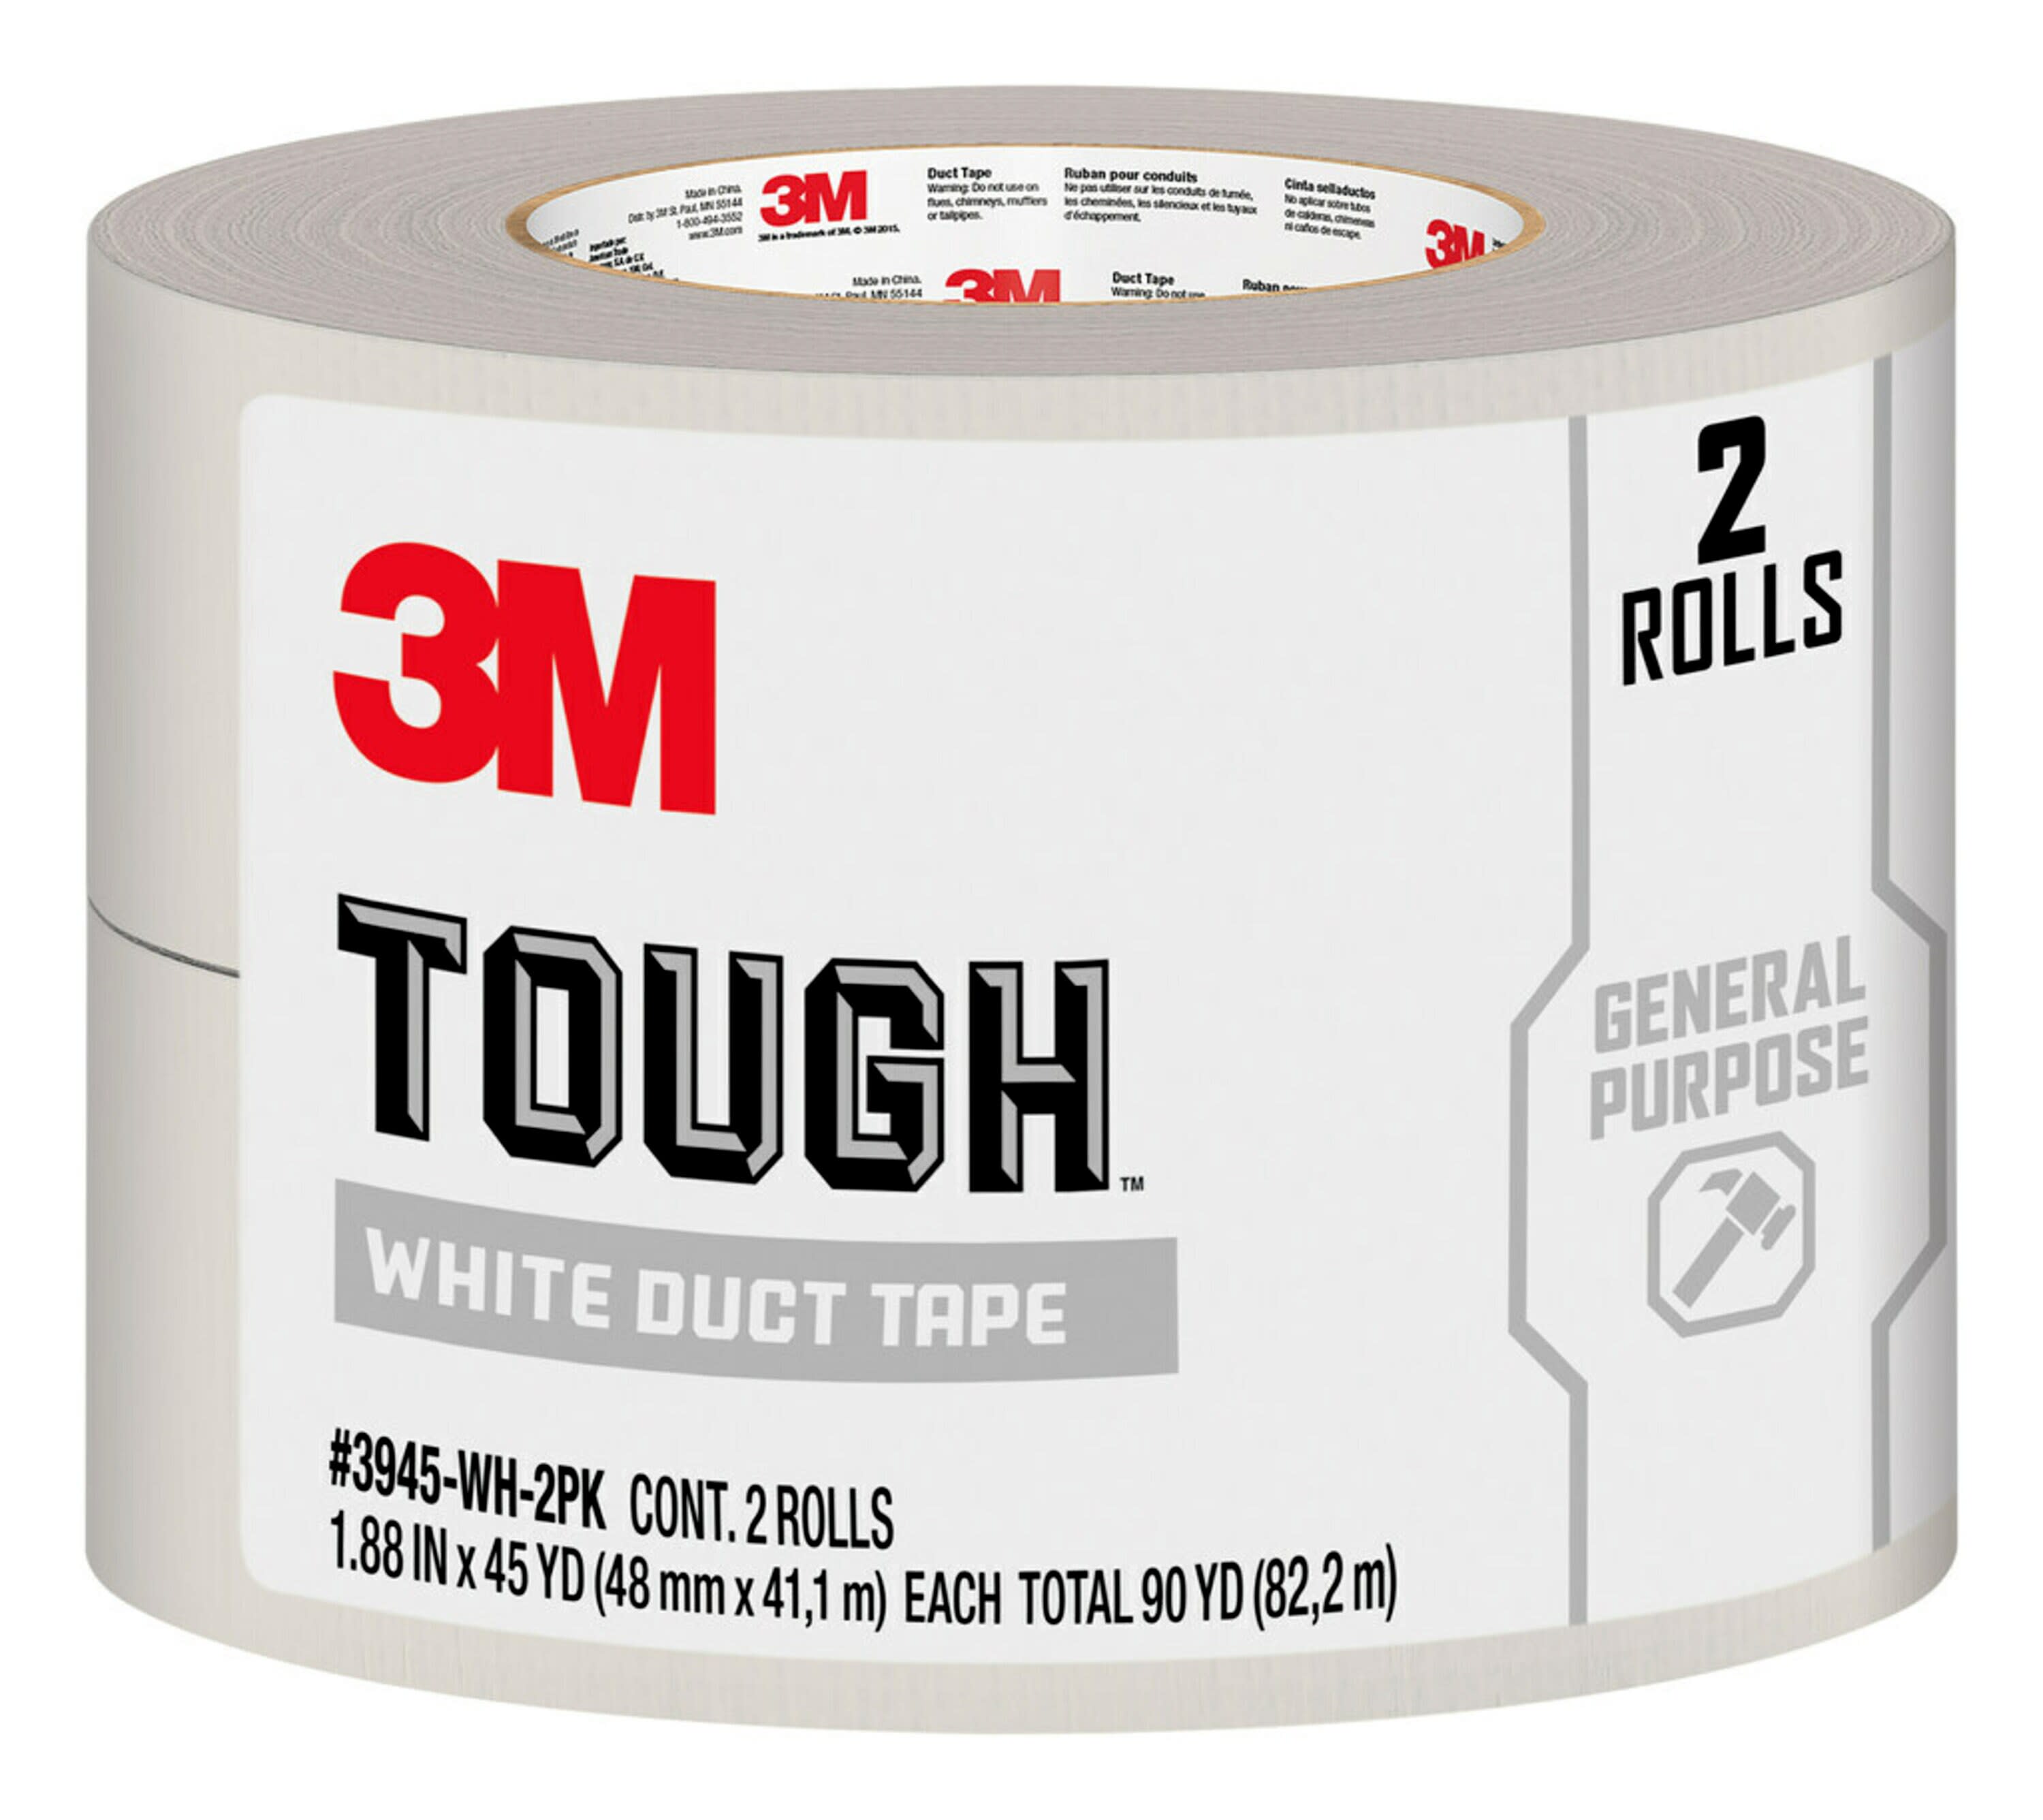 4 COUNT 3M DUCT TAPE BASIC 1.88 IN X 55 YD